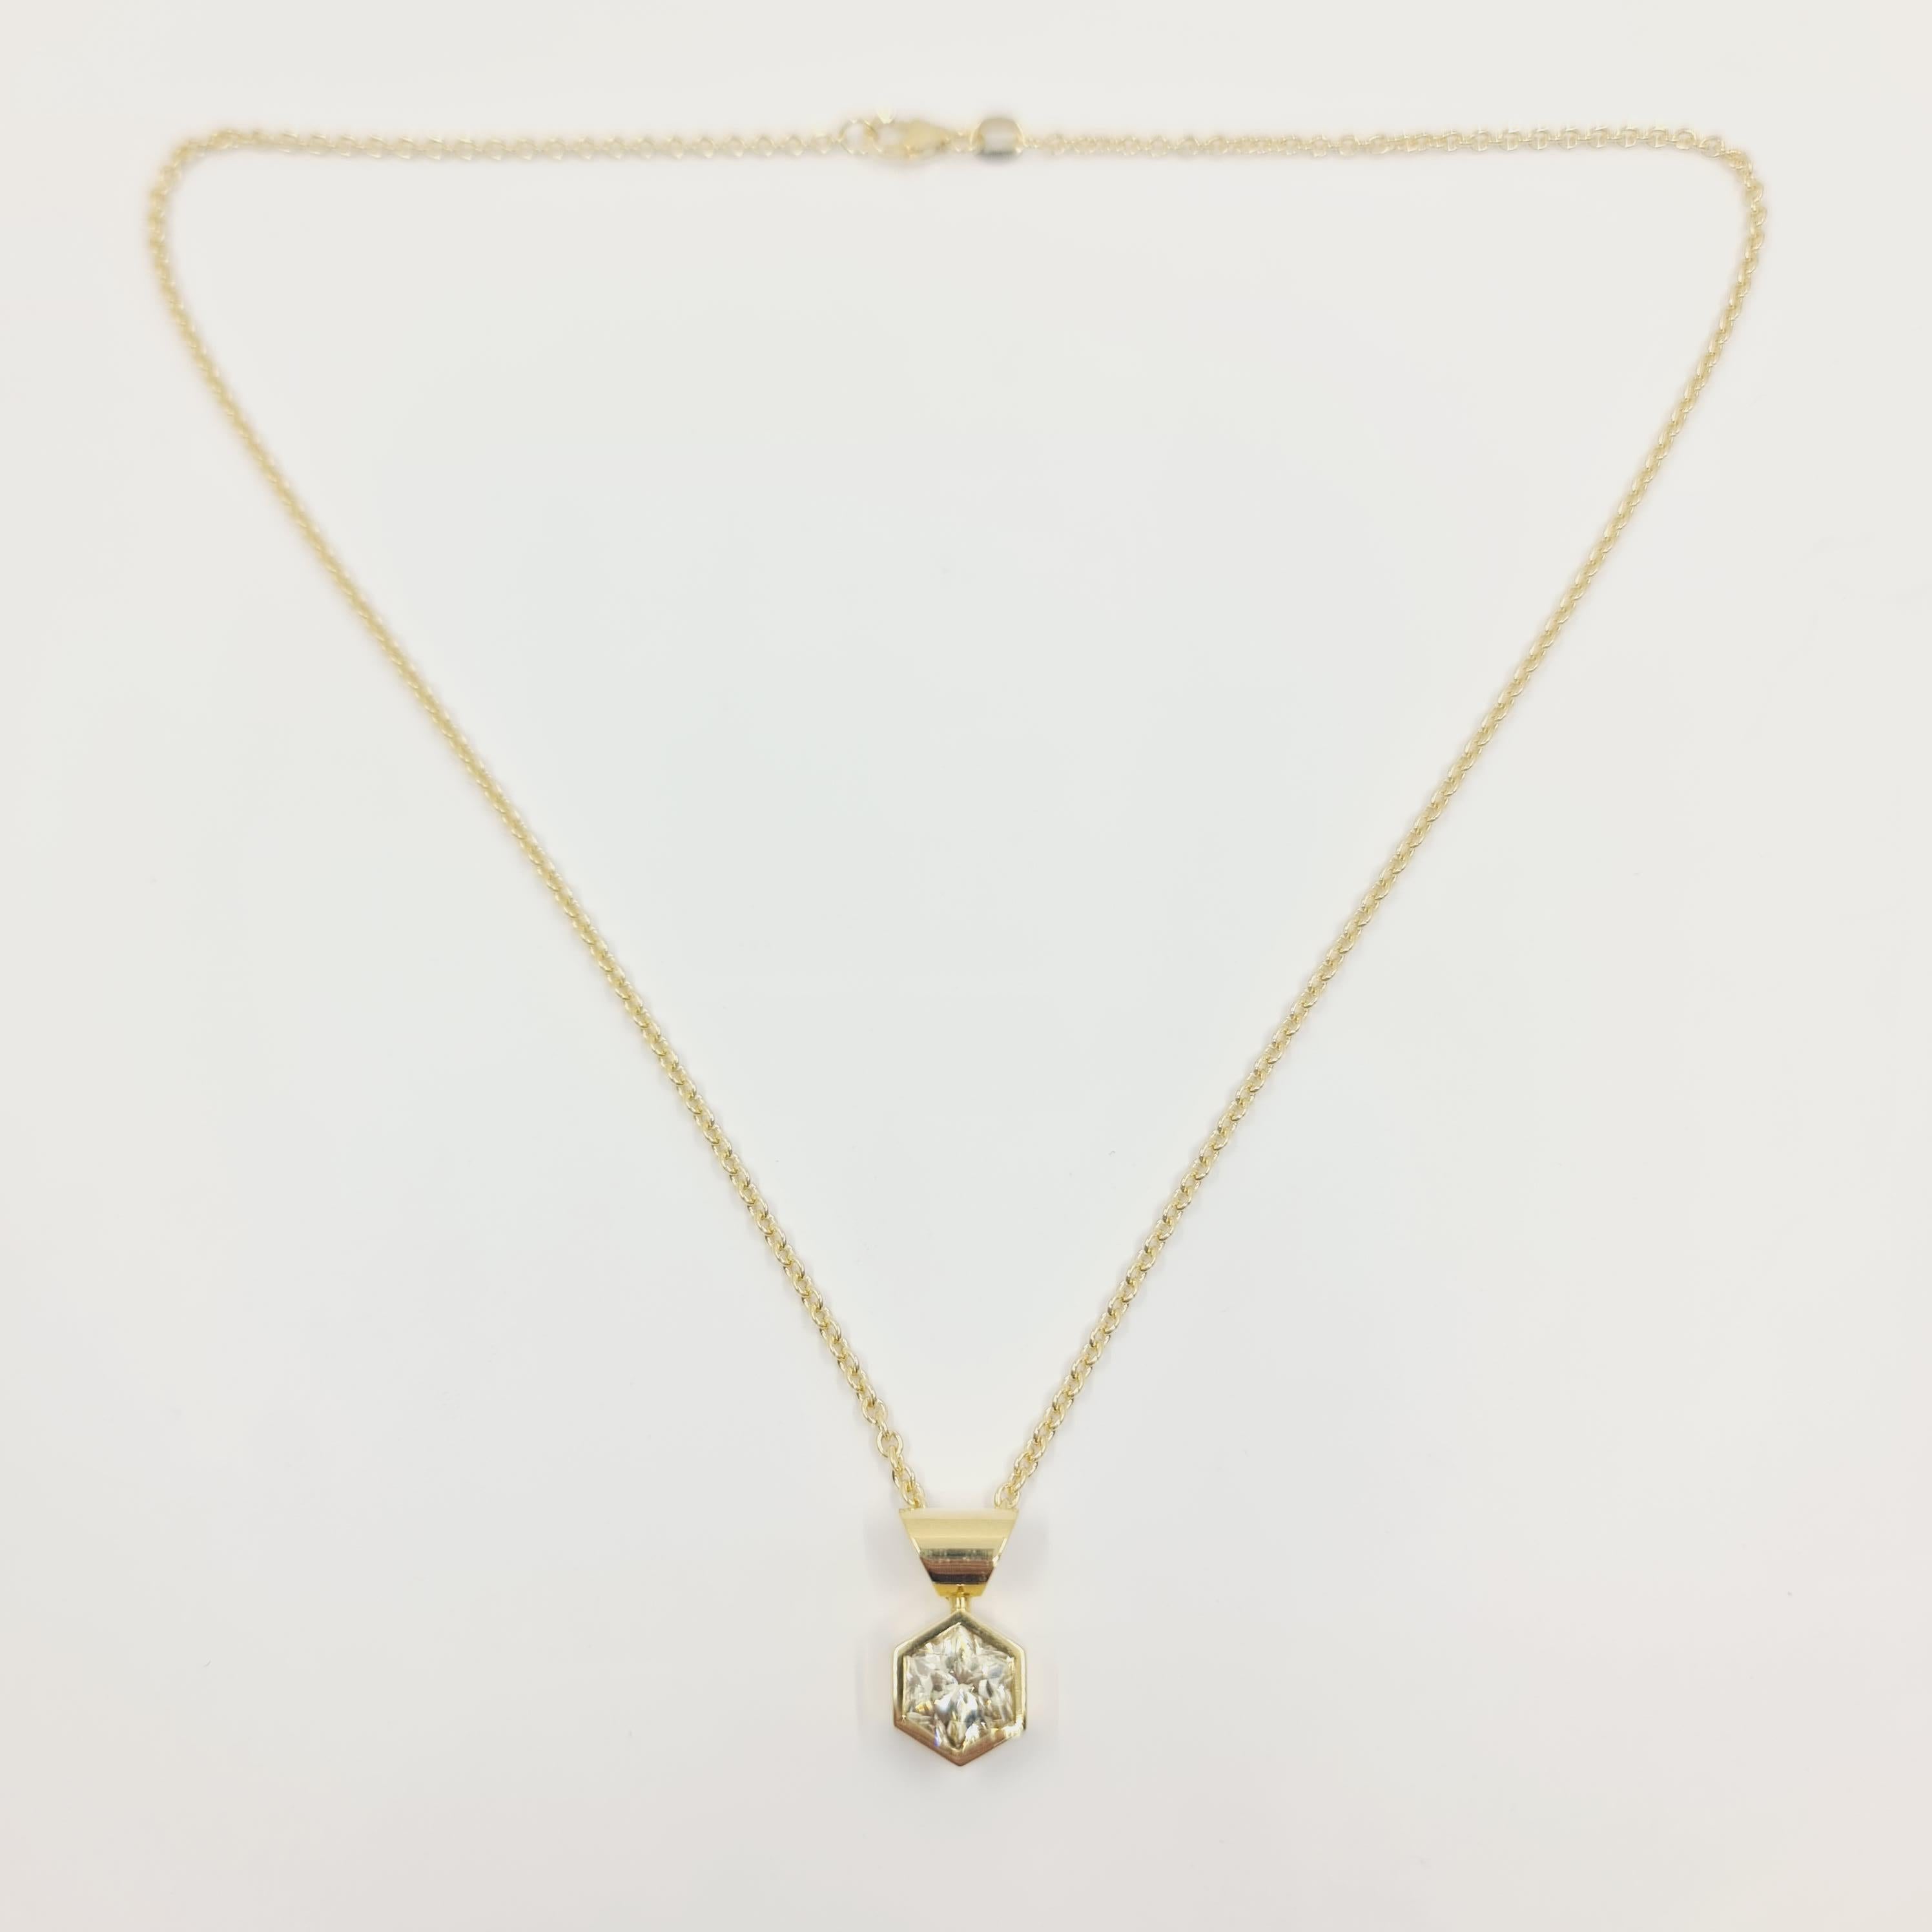 Modern HRD Certified 2.00 Ct. Diamond Necklace 750 Gold with Rare Hexagon Cut Diamond For Sale